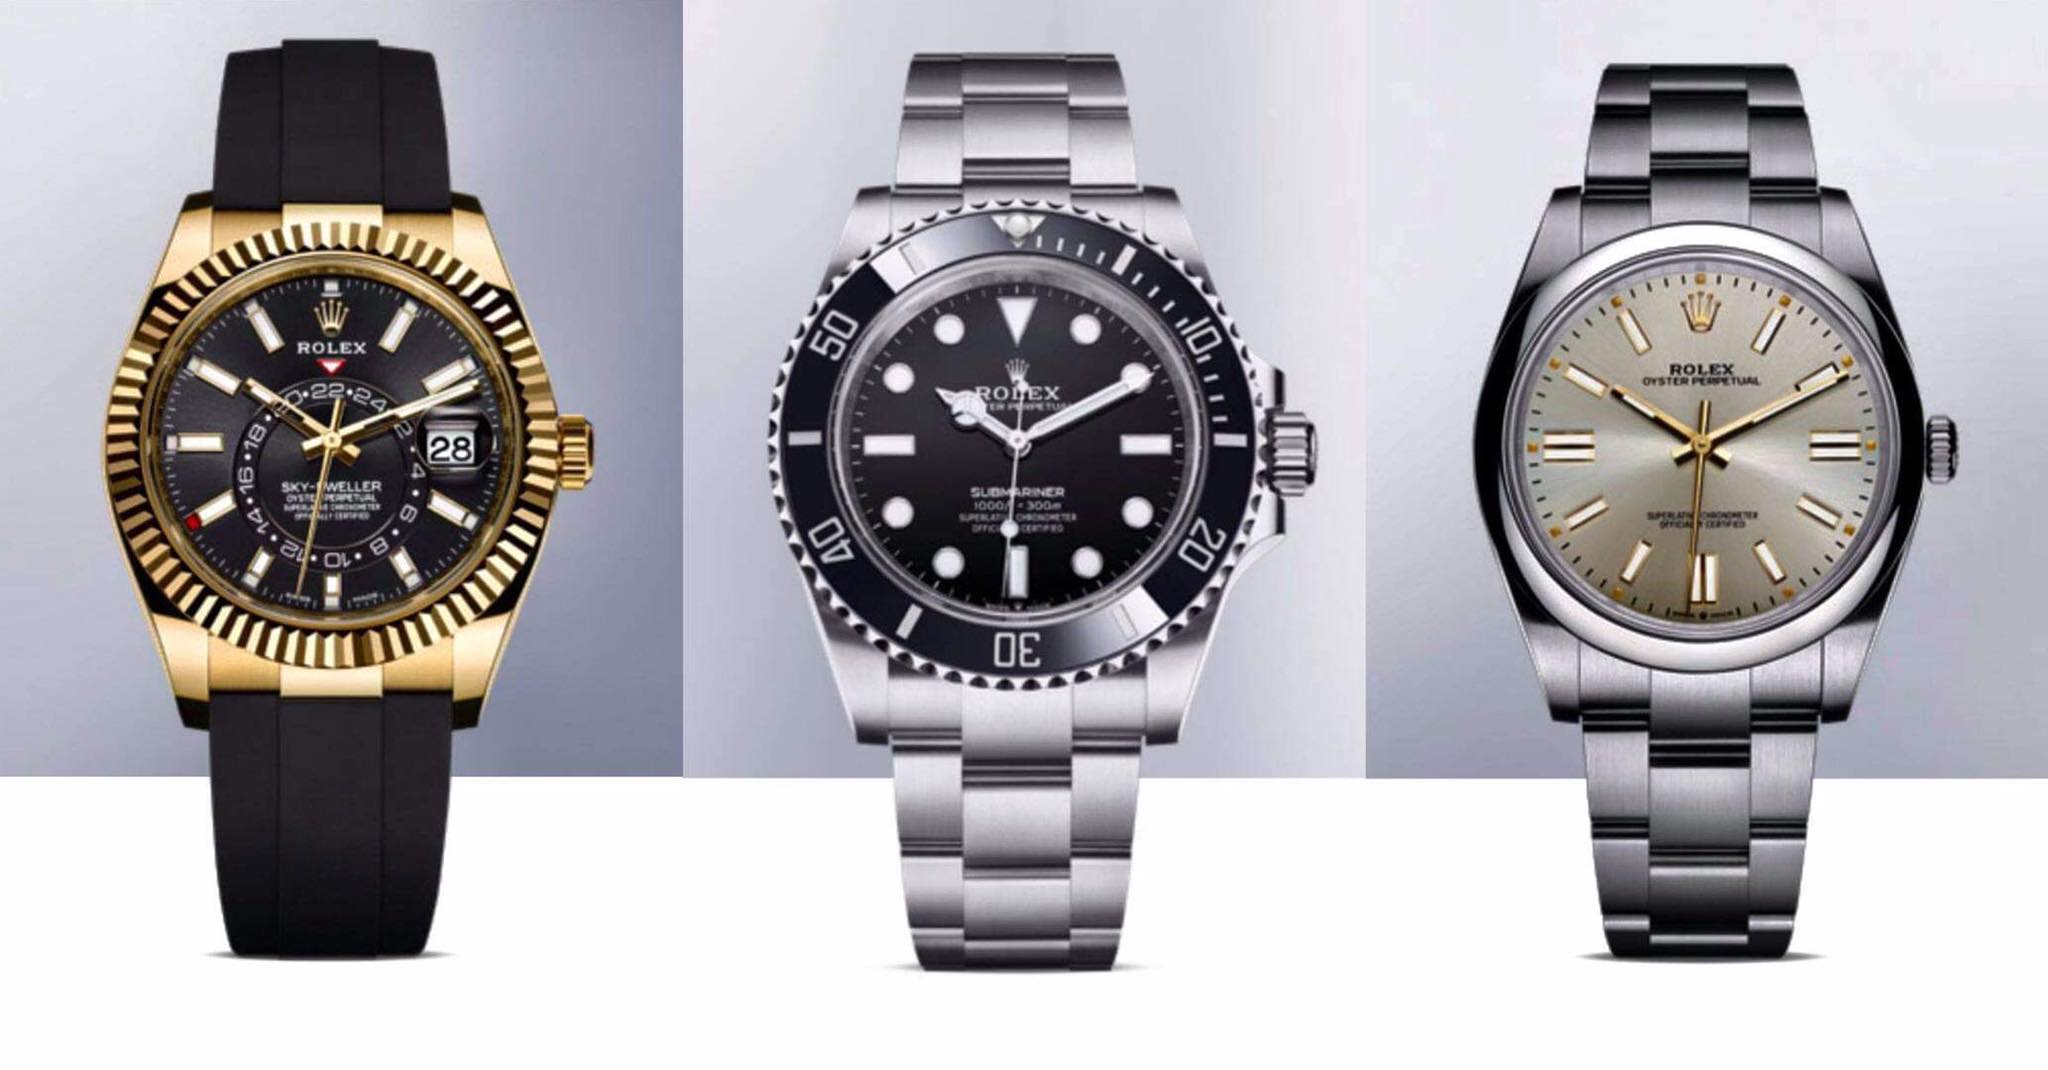 Rolex introduces updated Oyster Perpetual collection